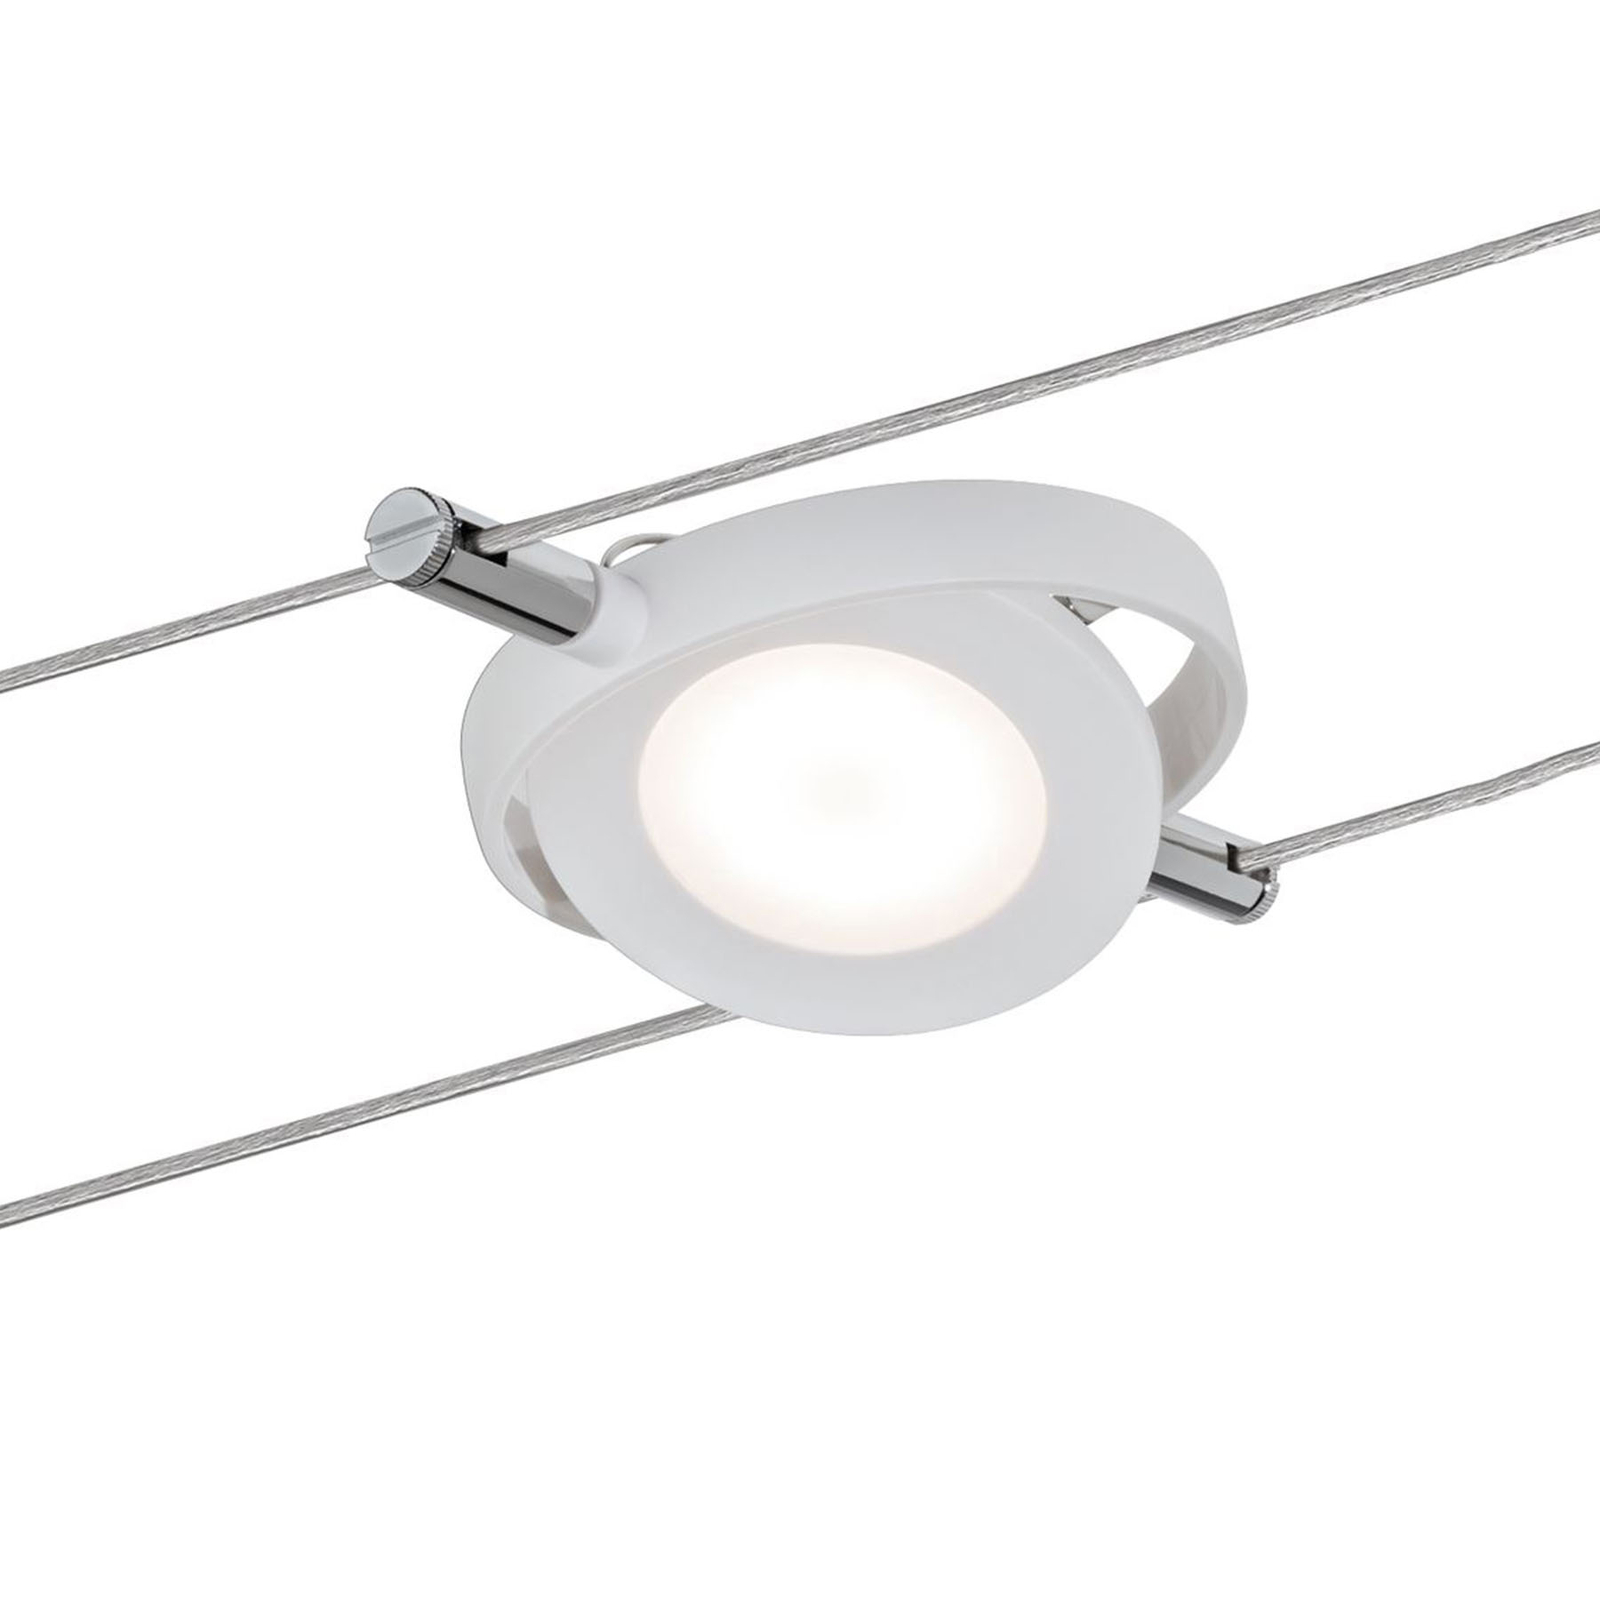 RoundMac LED cable lighting system tunable white